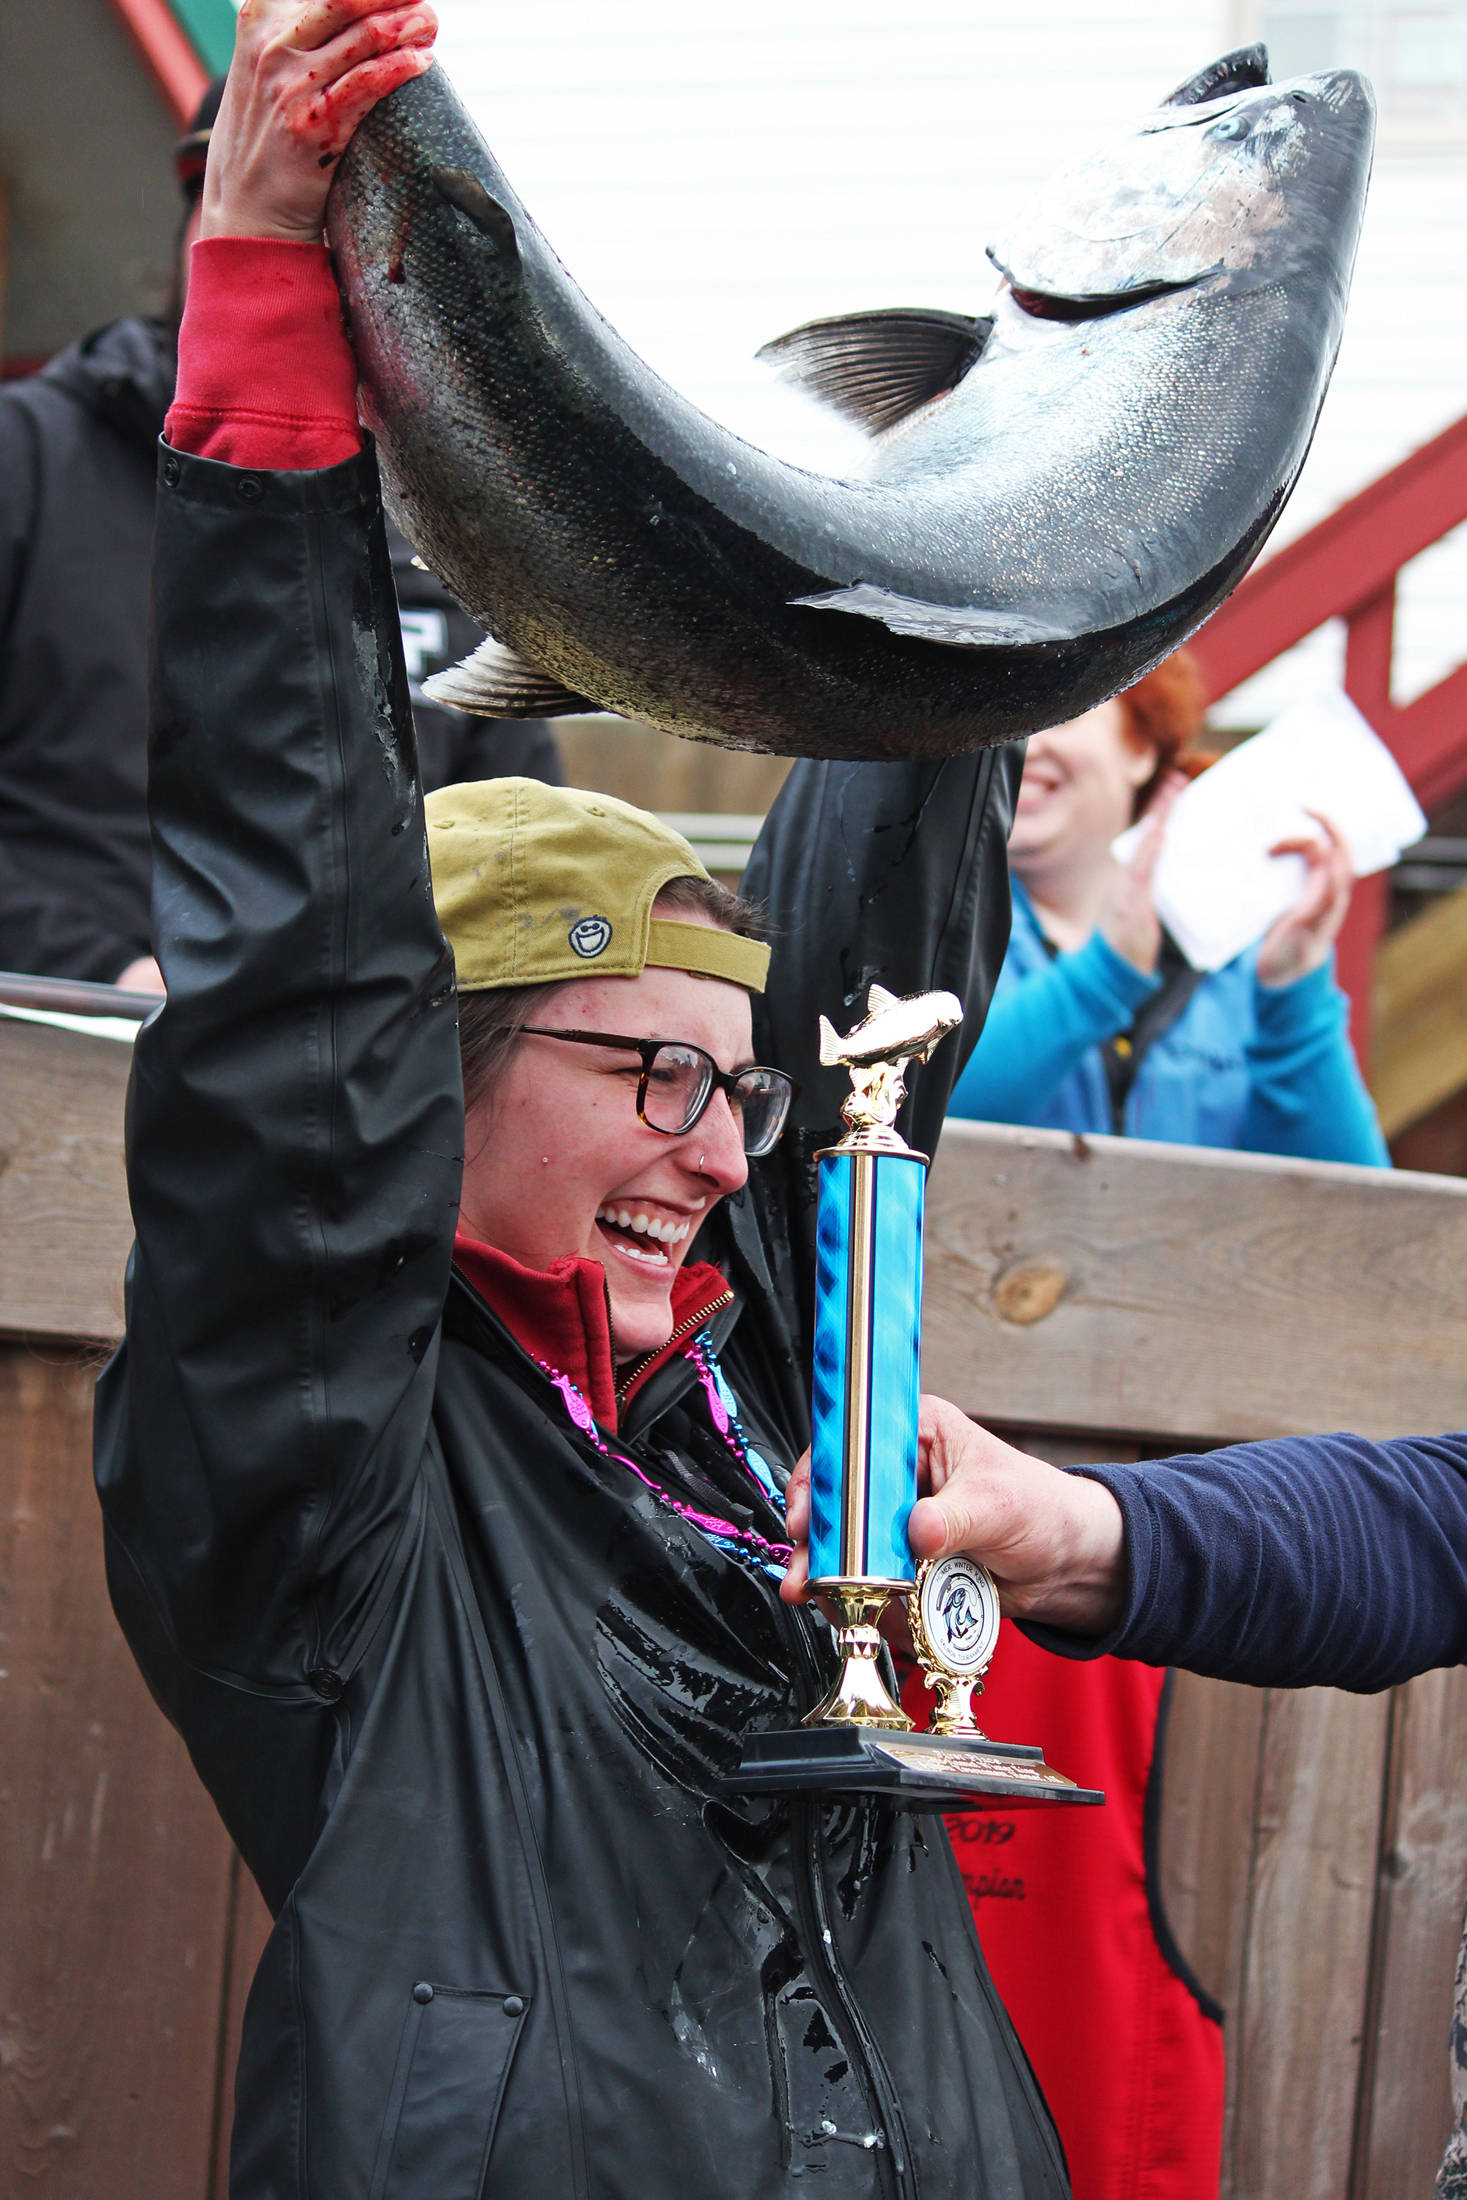 Shayna Perry, of Eagle River, holds up her winning 26.7-pound white salmon at the award ceremony following the Homer Winter King Salmon Tournament on Saturday, March 23, 2019 at Coal Point Seafoods in Homer, Alaska. Perry, who also won the award for largest white salmon, is the first woman to win the annual tournament. (Photo by Megan Pacer/Homer News)